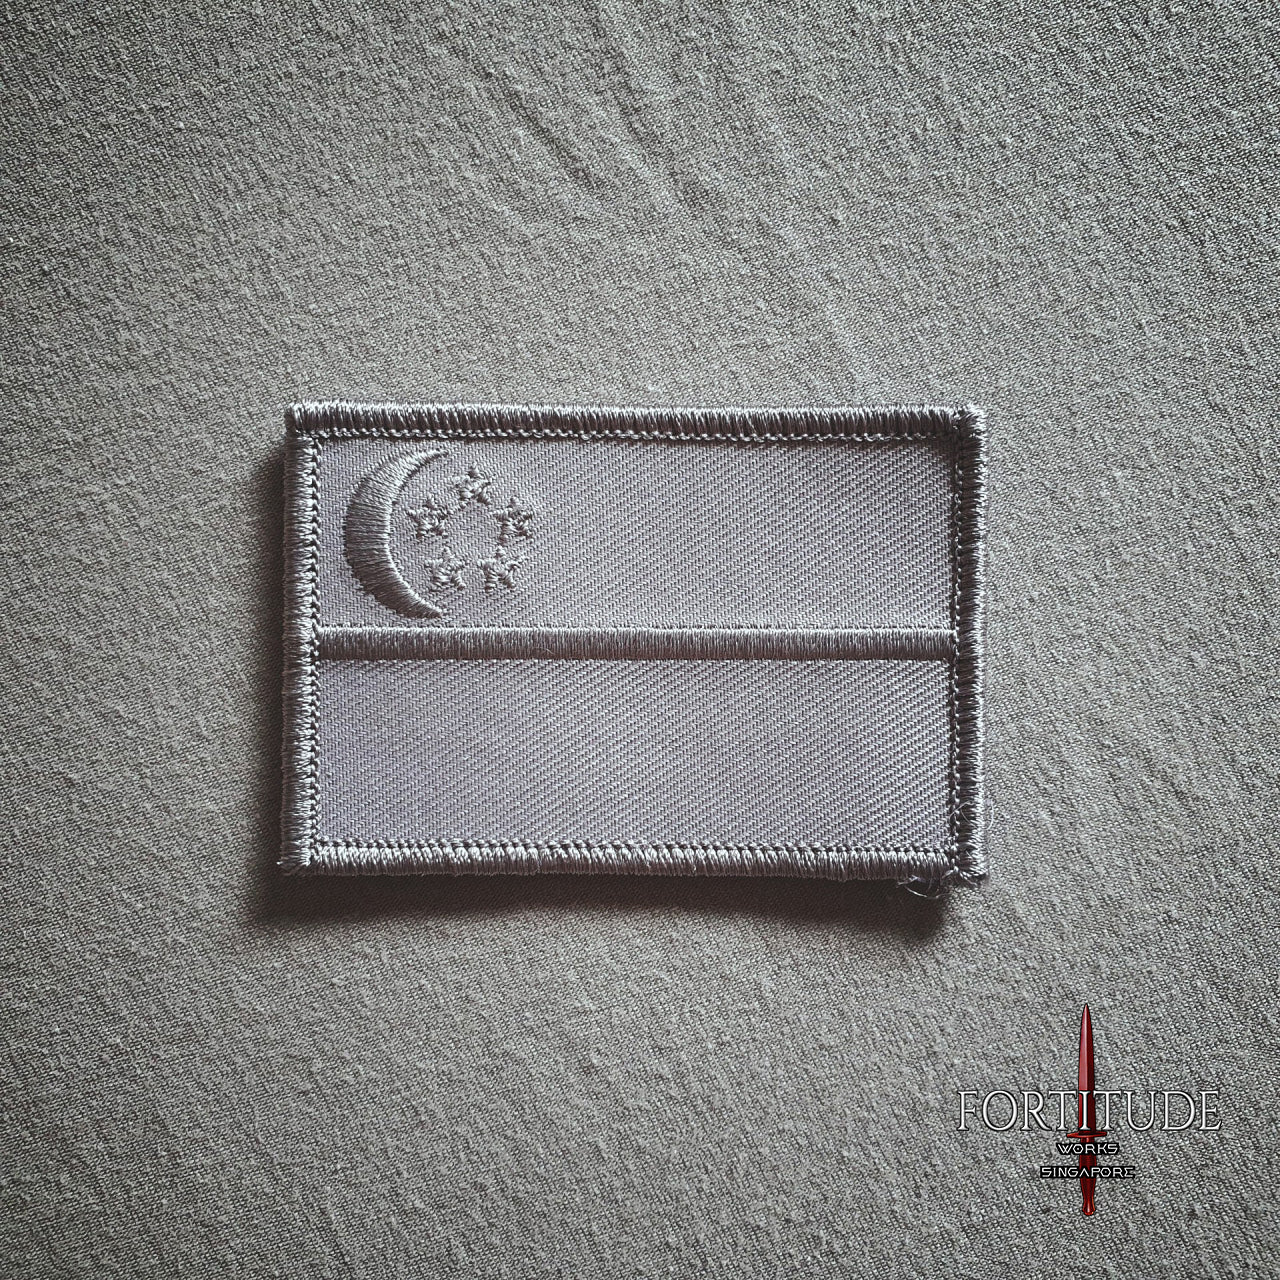 LIGHT GREY SG FLAG PATCH - FORTITUDE WORKS SINGAPORE